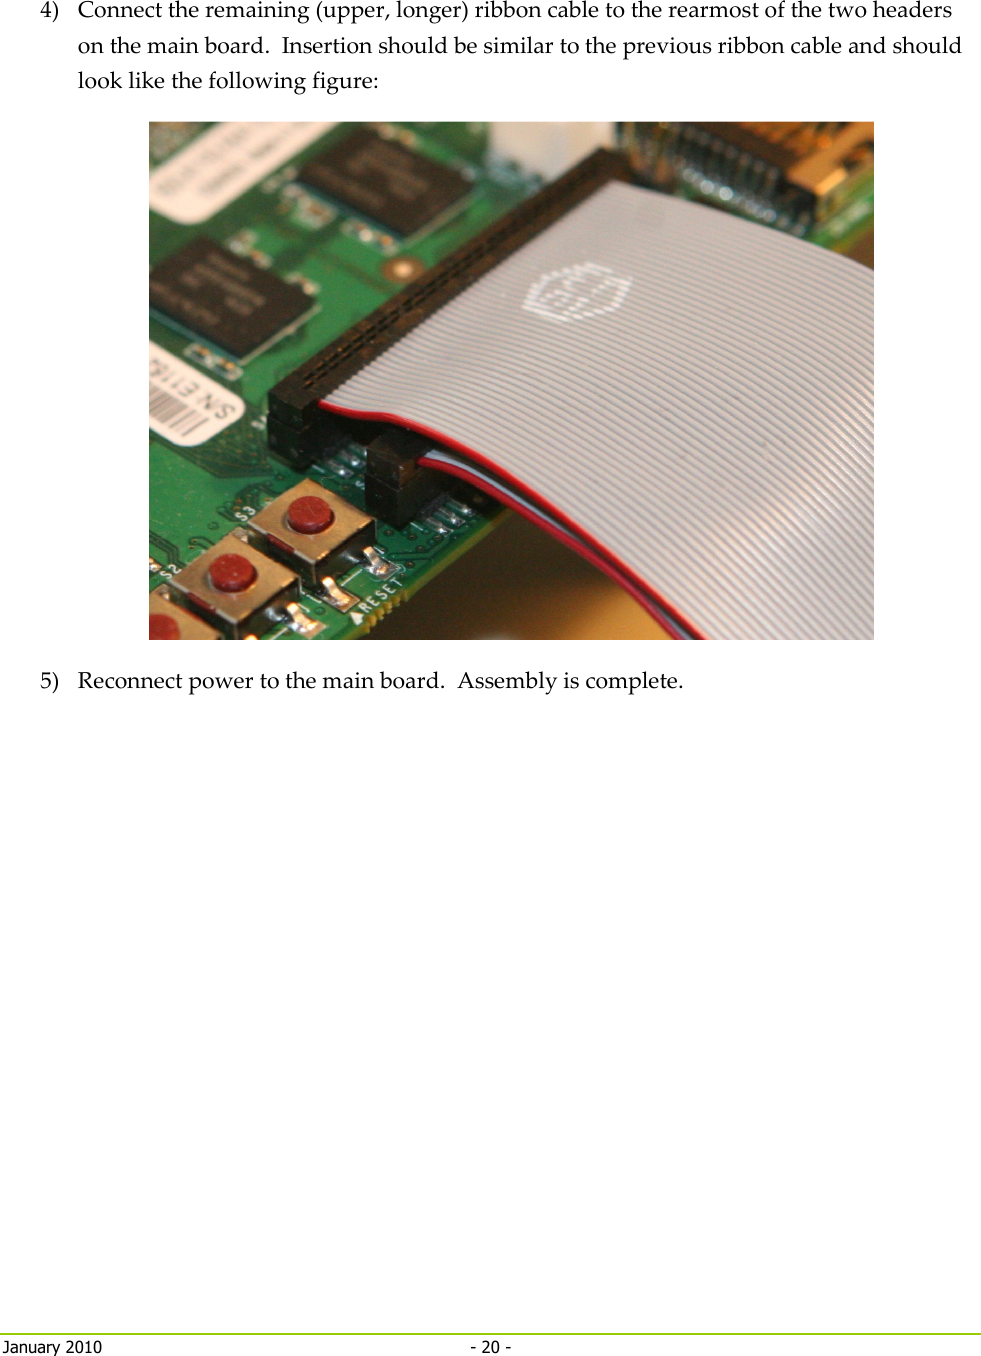     January 2010  - 20 -   4) Connect the remaining (upper, longer) ribbon cable to the rearmost of the two headers on the main board.  Insertion should be similar to the previous ribbon cable and should look like the following figure:  5) Reconnect power to the main board.  Assembly is complete.   